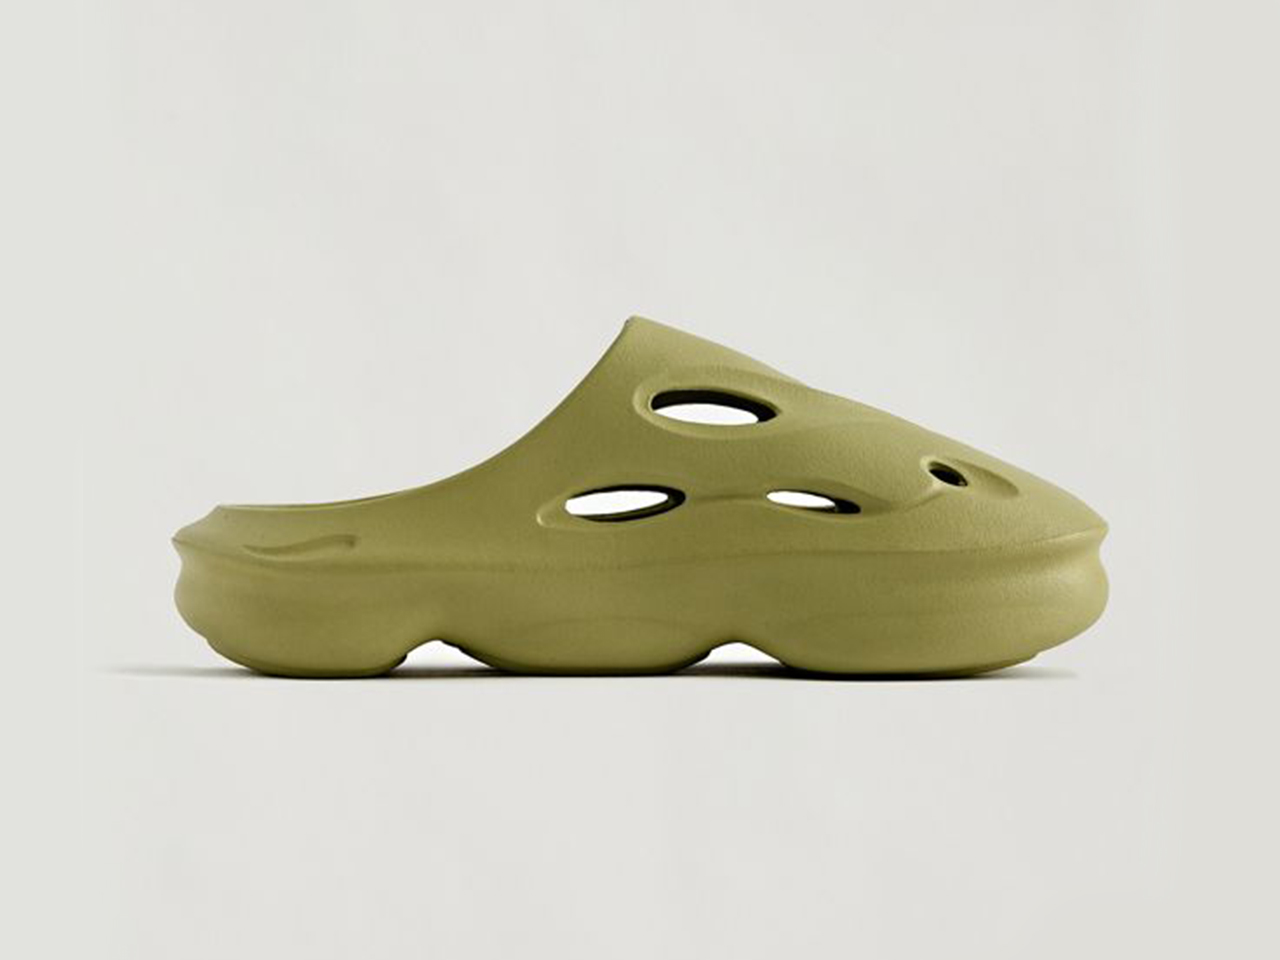 A side profile of a khaki green pair of water clogs from Urban Outfitters.